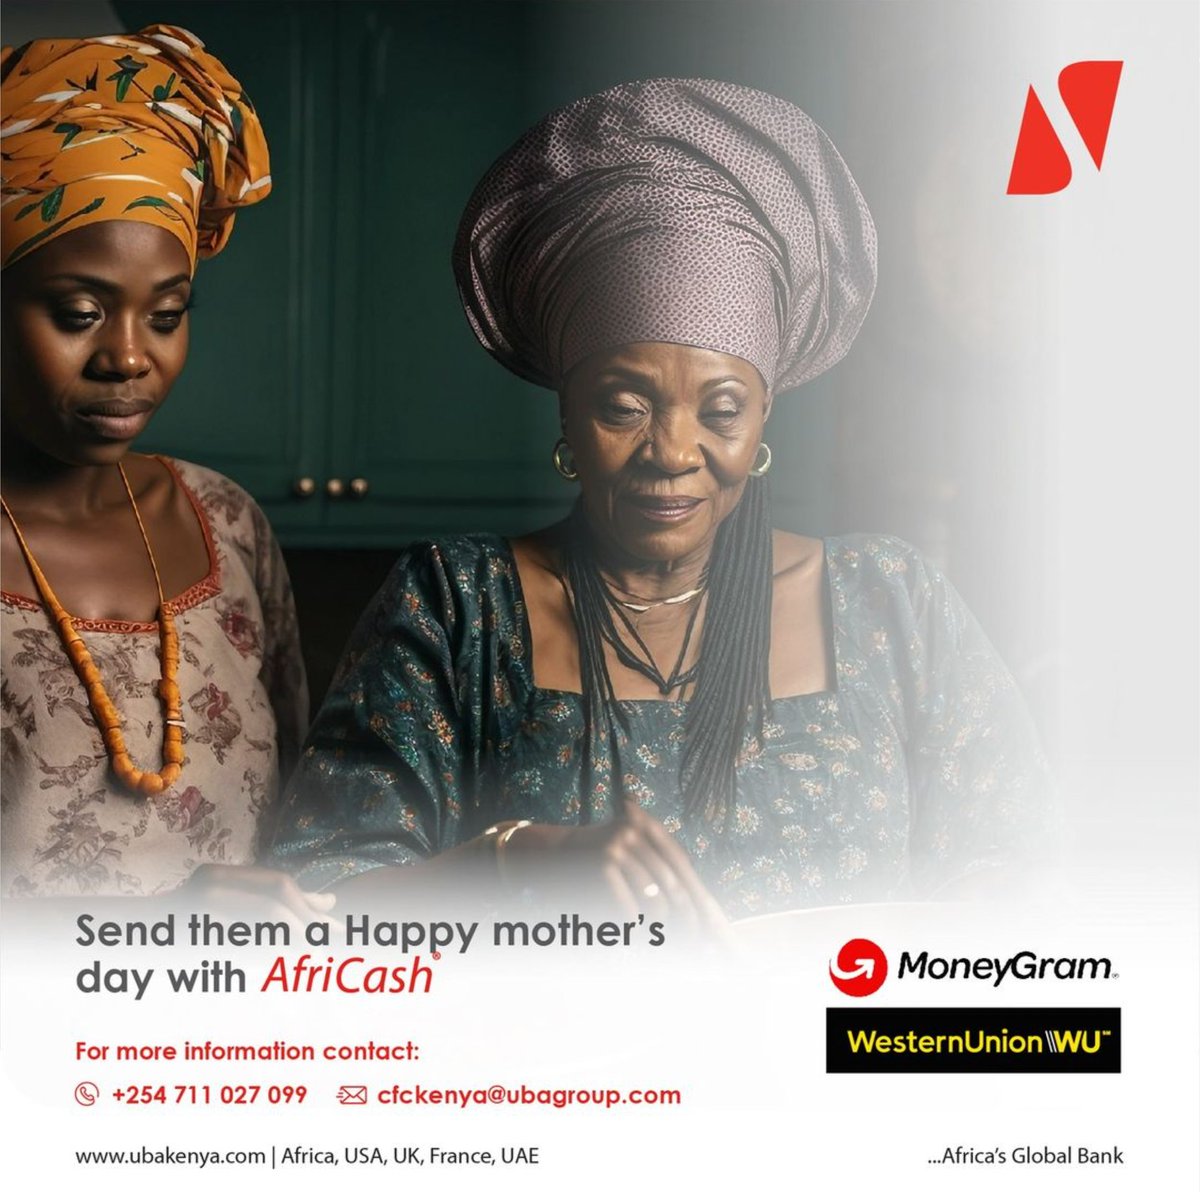 Show your appreciation for your mother this Mother's Day with a heartfelt gesture. Surprise her by sending money through AfriCash, UBA's hassle-free money transfer service. Visit your nearest UBA branch to make her day truly special.
#mothersday
#africasglobalbank 
#ubakenya